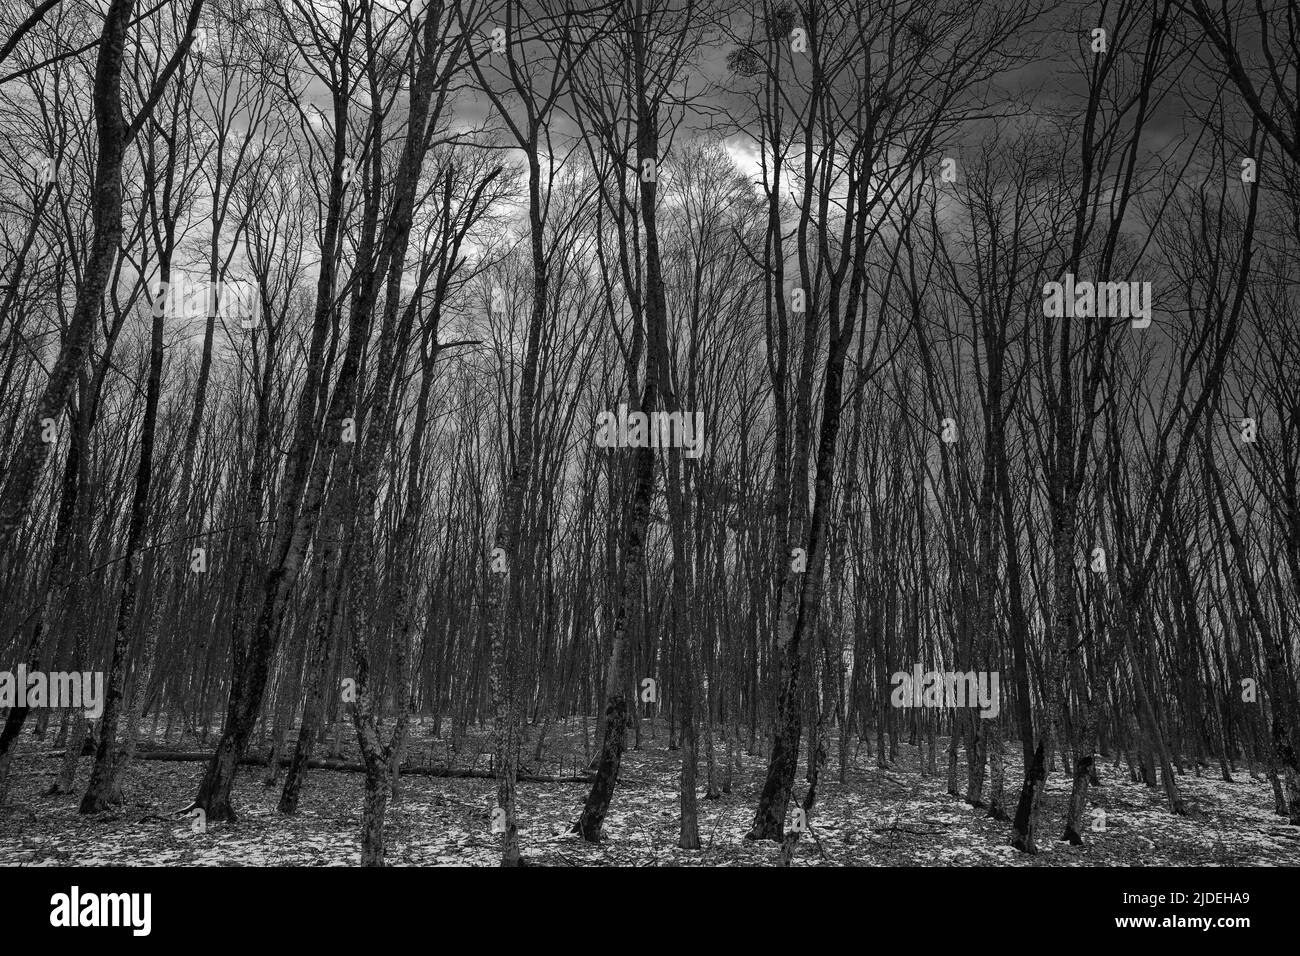 gloomy forest winter landscape at dusk. scaring trees and snow Stock Photo